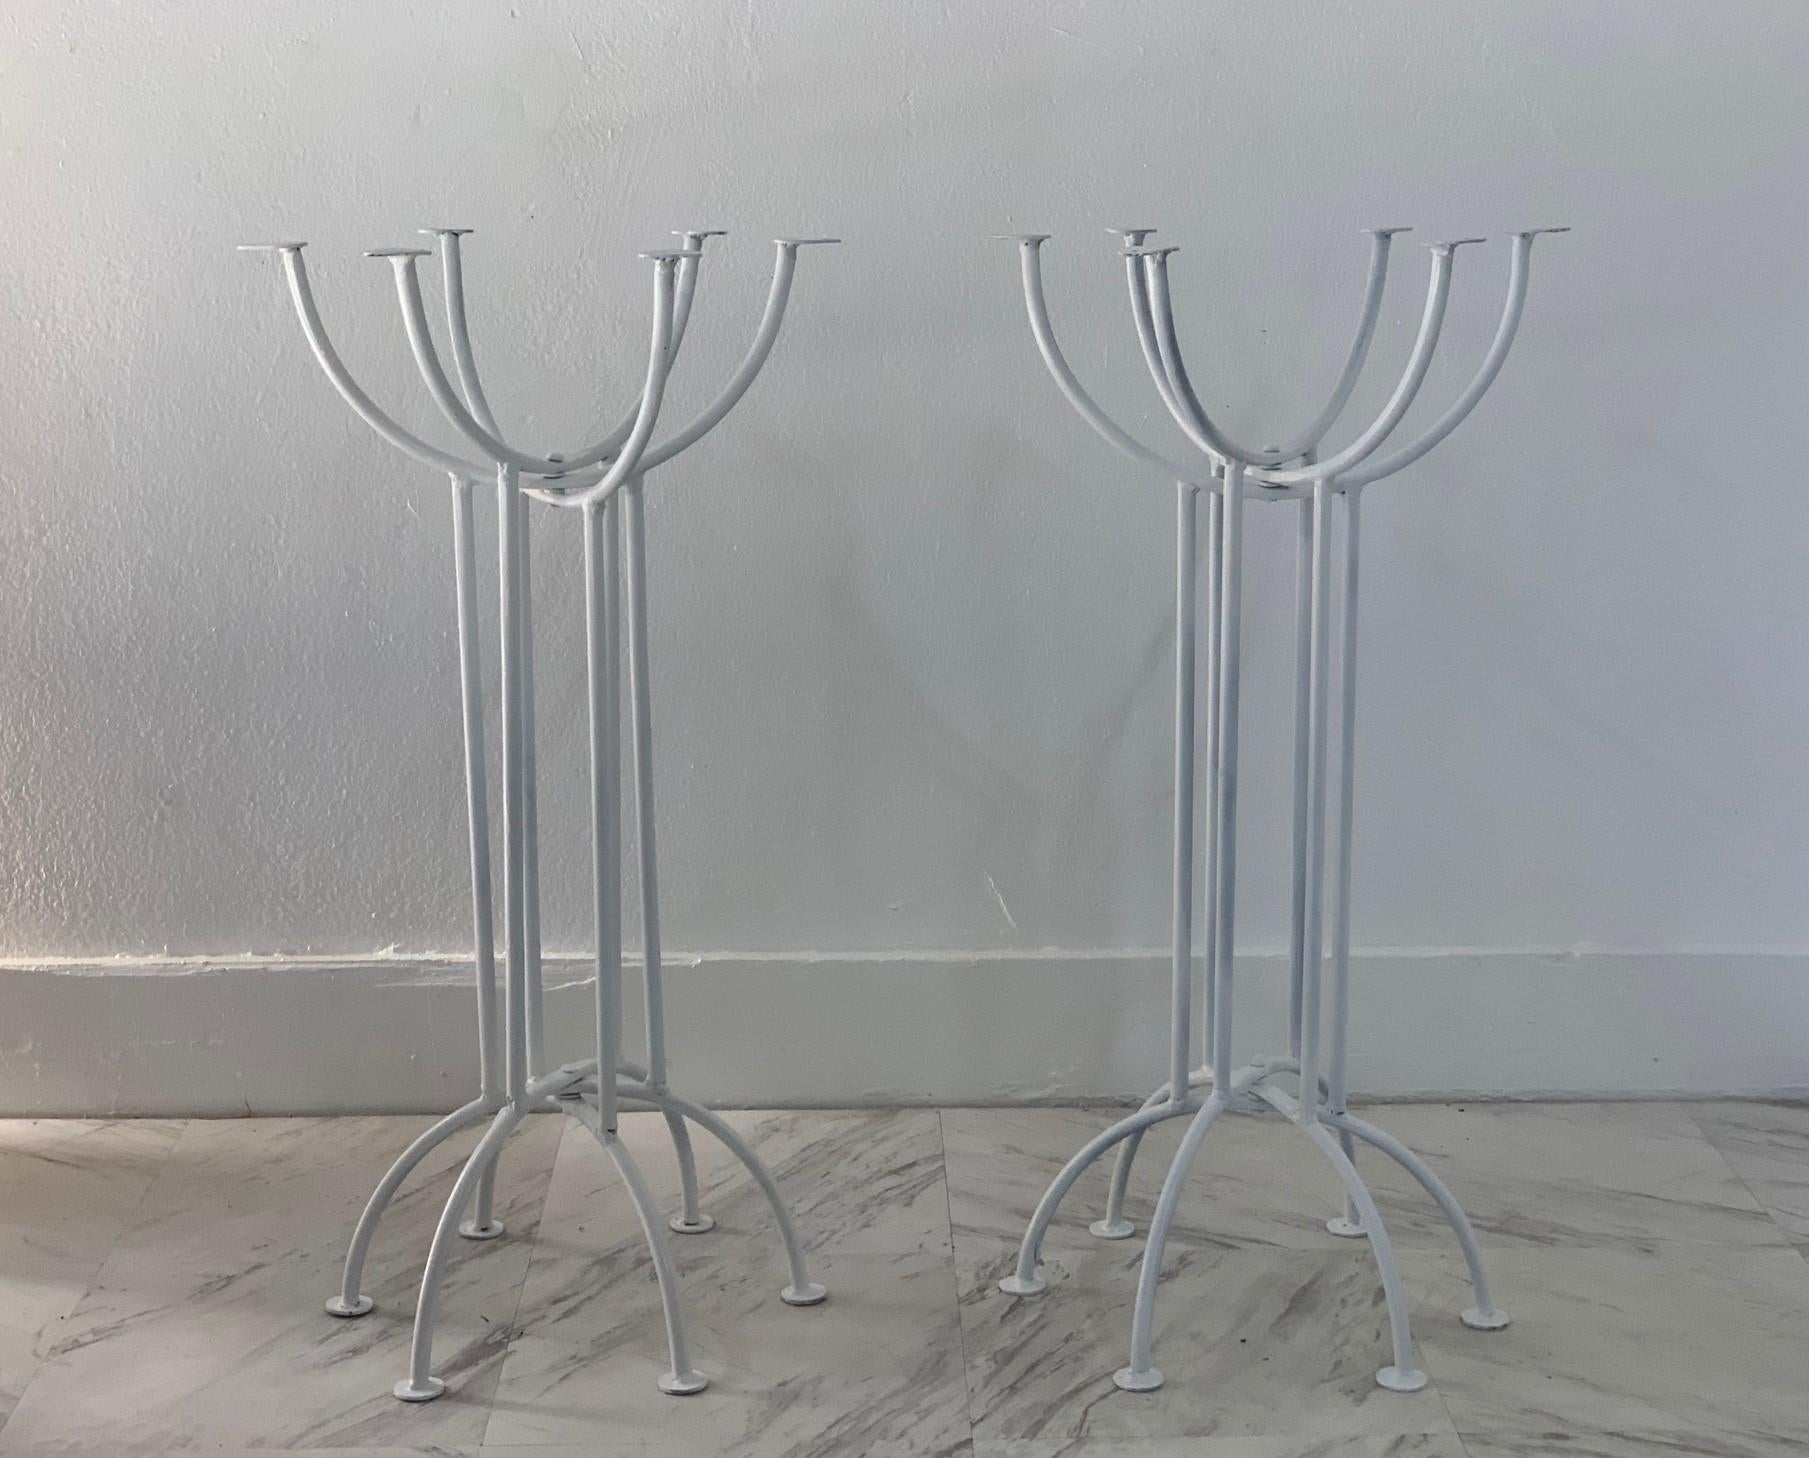 Pair of 1950s French wrought iron planters. The planters have a white painted finish.